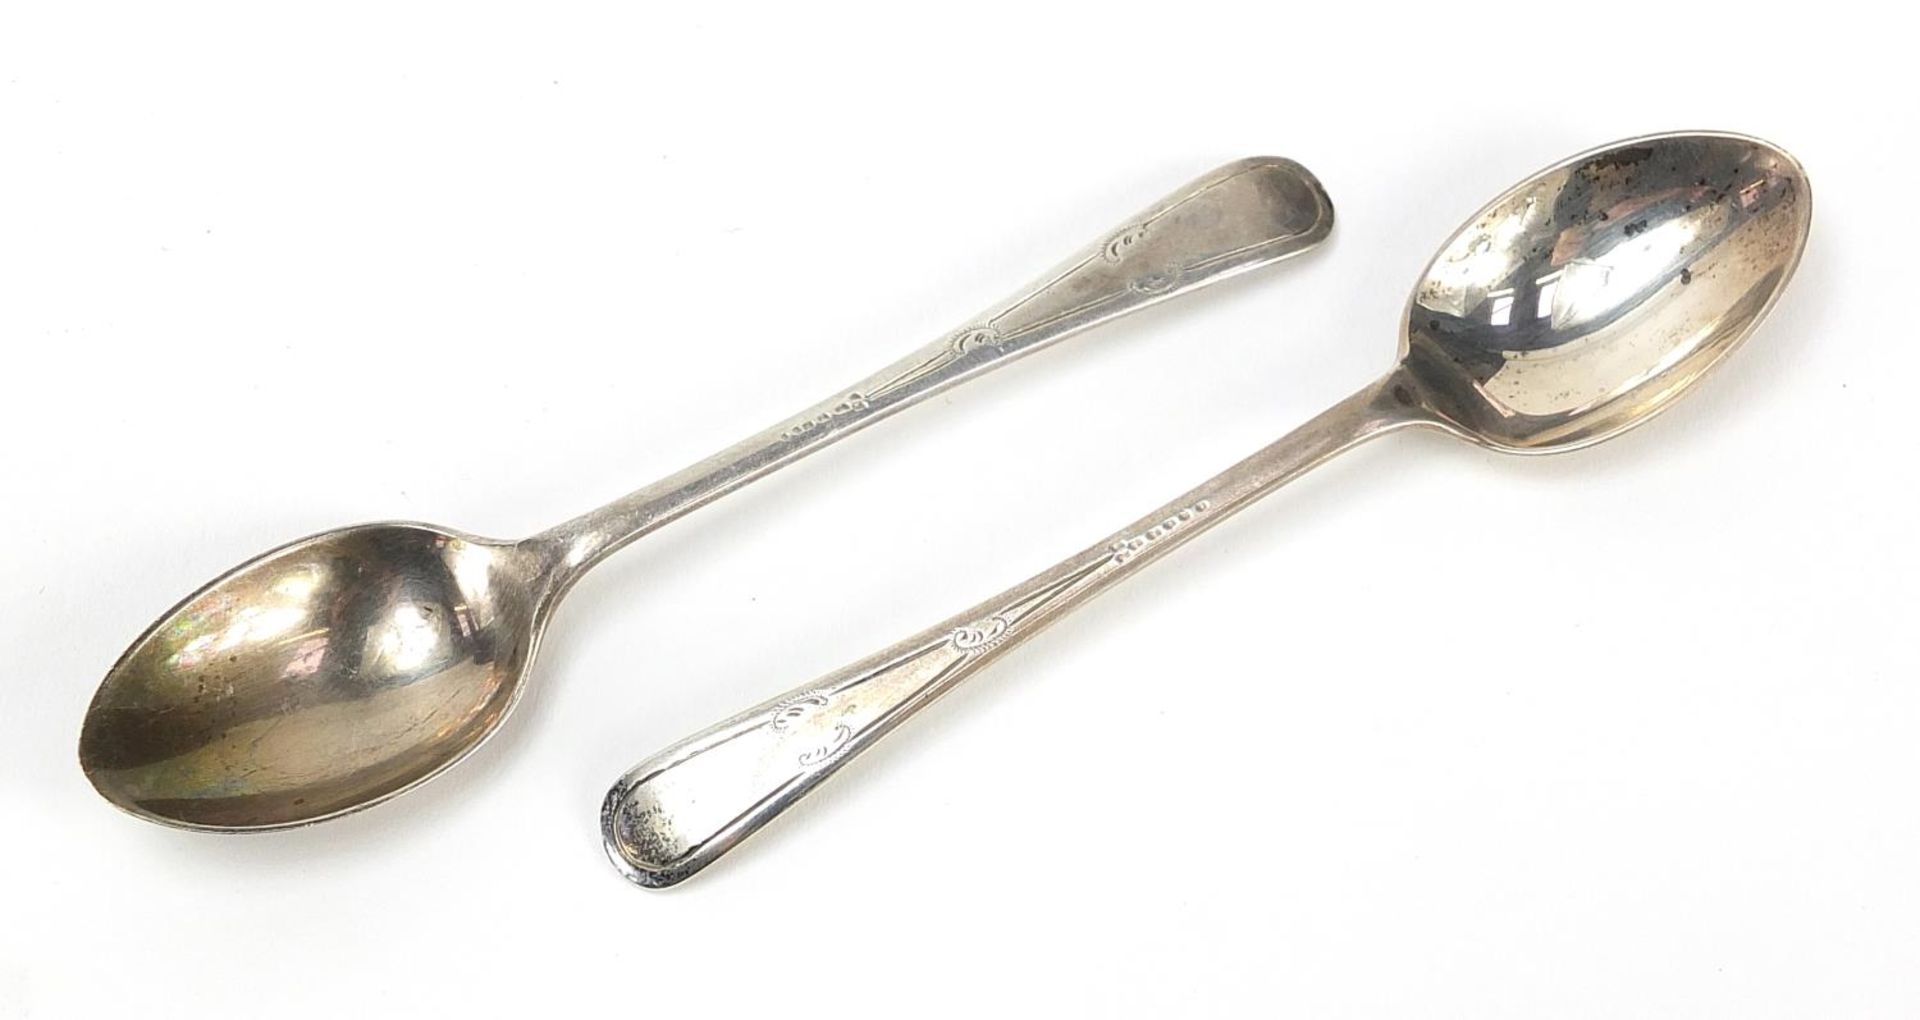 W S Savage & Co, set of six silver teaspoons and sugar tongs housed in a fitted case, Sheffield - Image 3 of 6